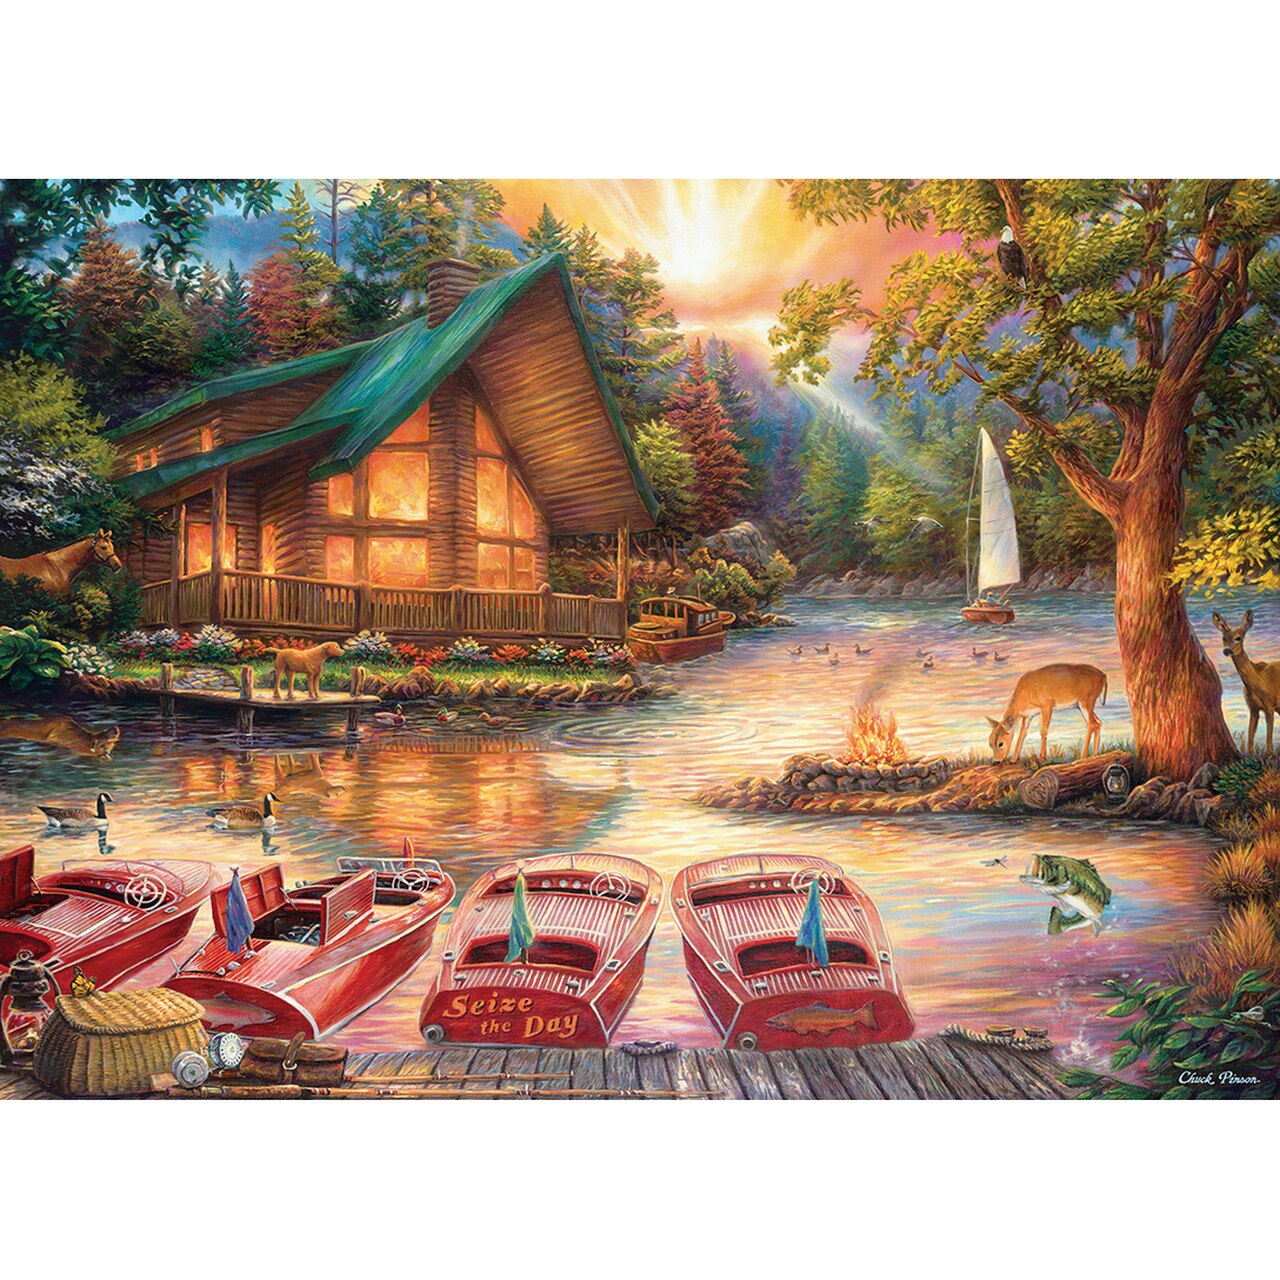 Chuck Pinson Gallery - Seize the Day 1000 Piece Jigsaw Puzzle by MasterPieces